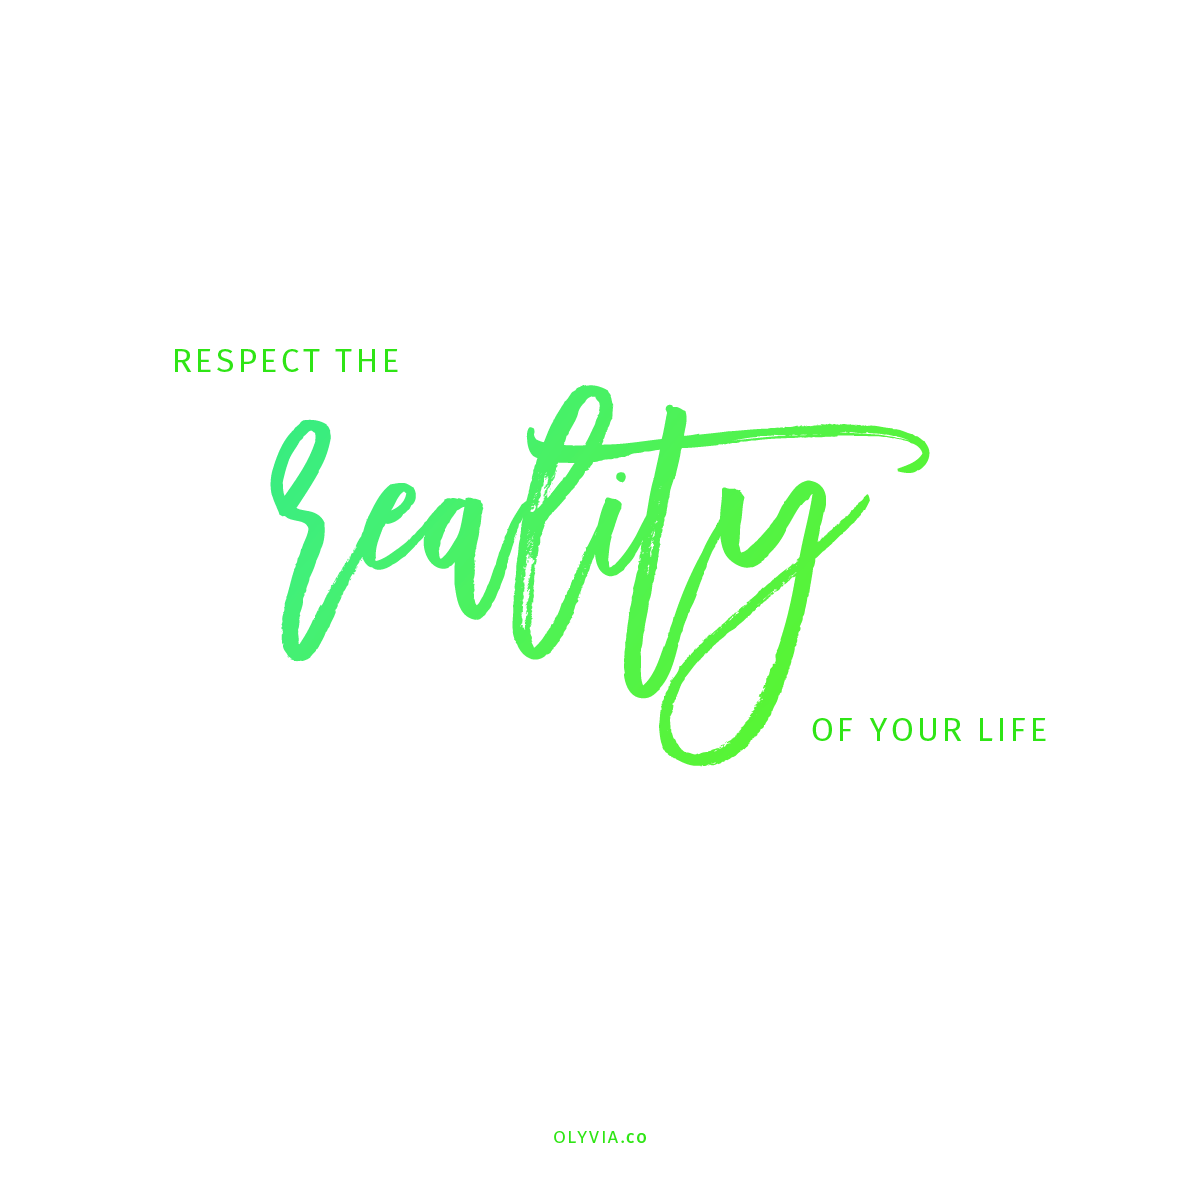 Real productivity starts with respecting the reality of YOUR life. @OlyviaMedia